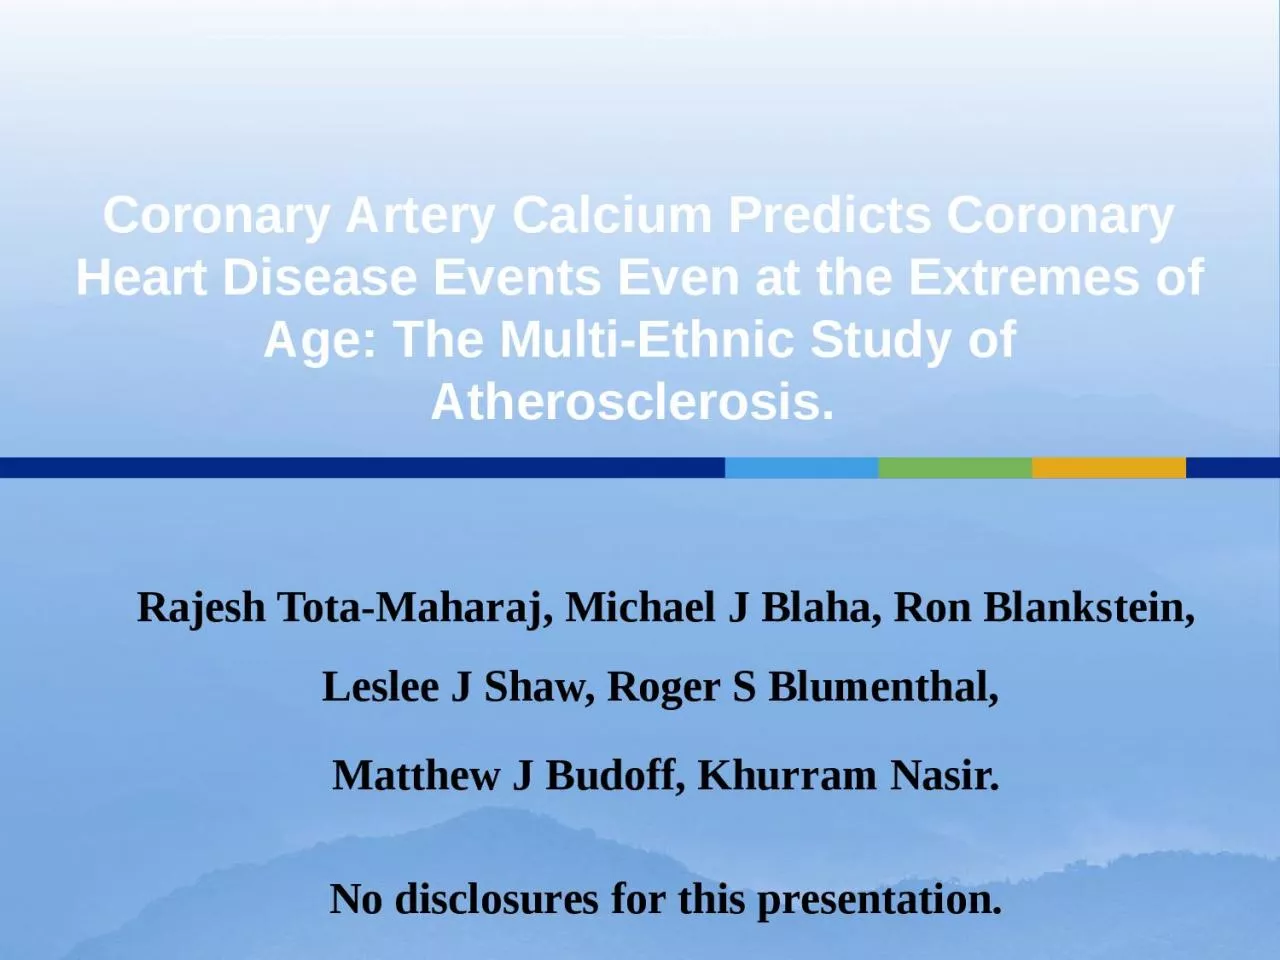 Coronary Artery Calcium Predicts Coronary Heart Disease Events Even at the Extremes of